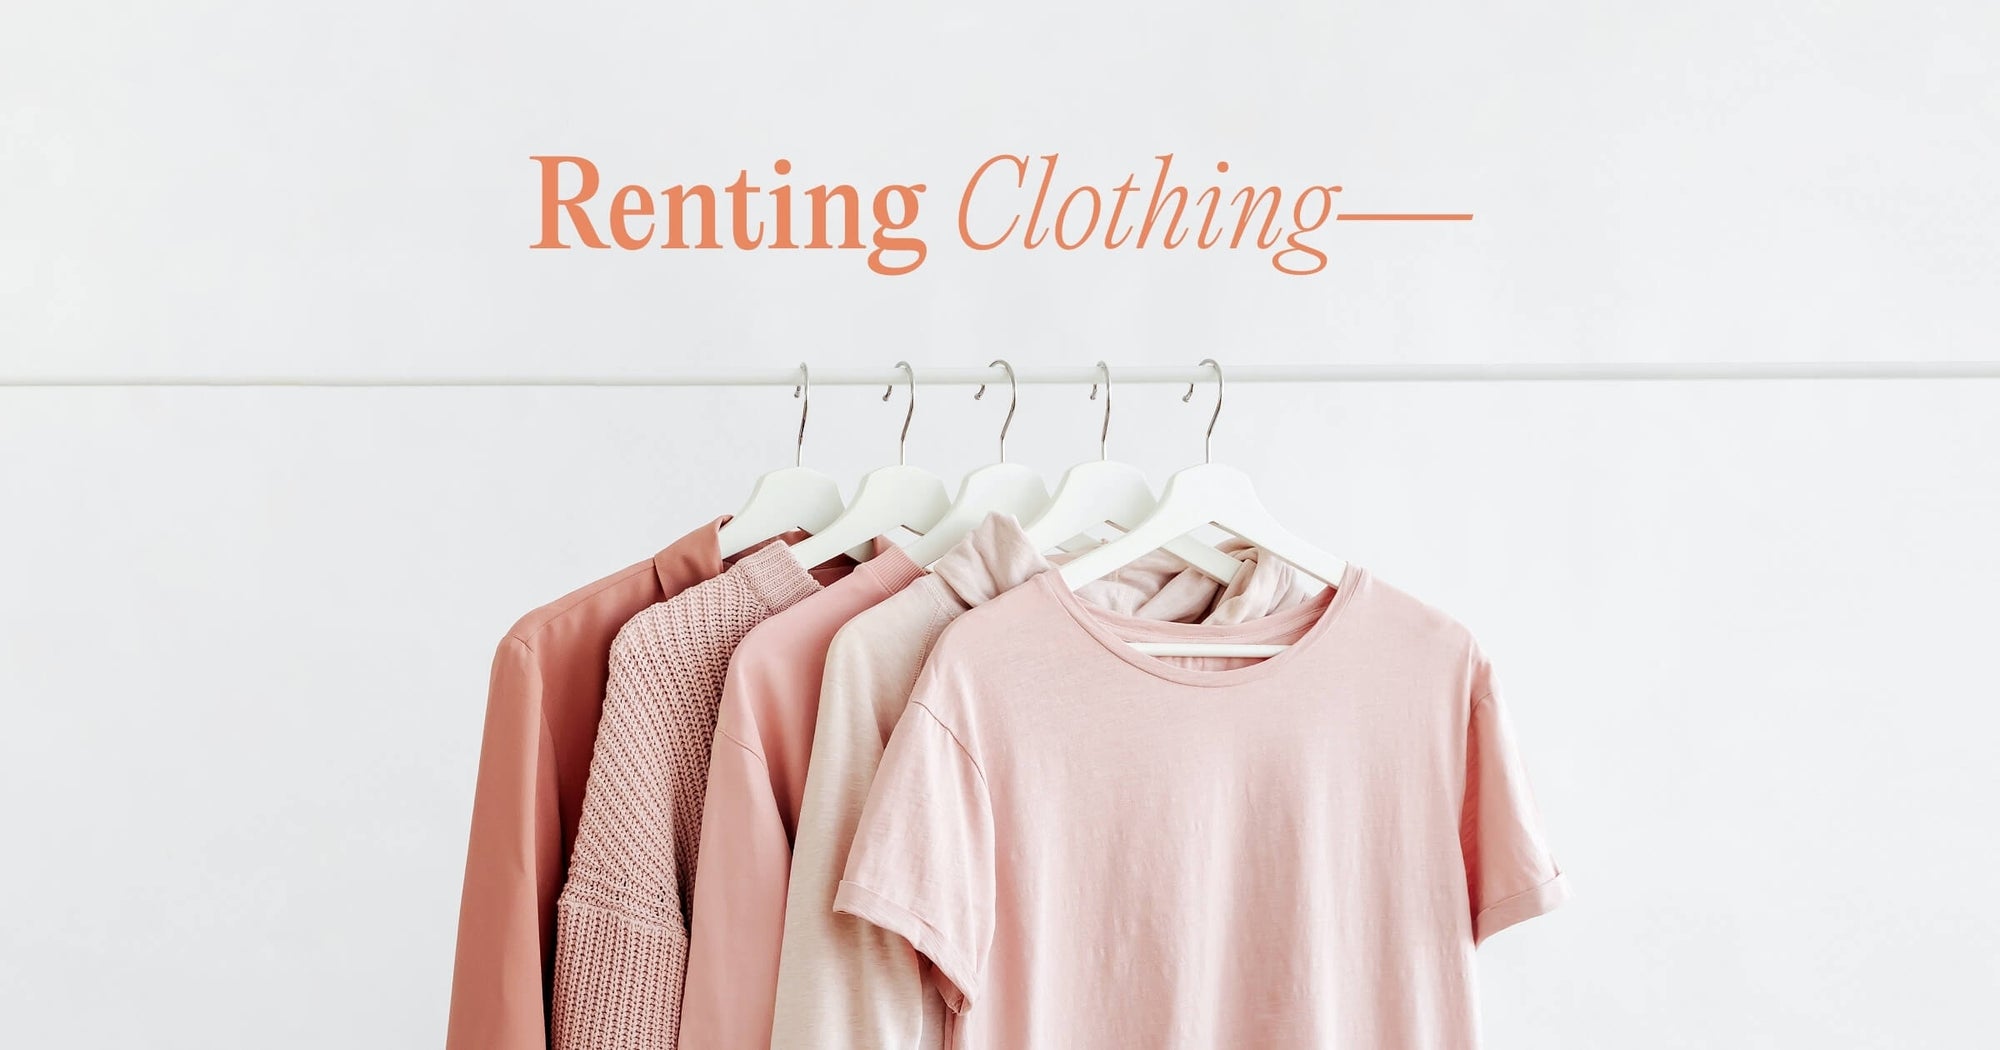 Forget Houses, It’s Time To Rent Your Clothing